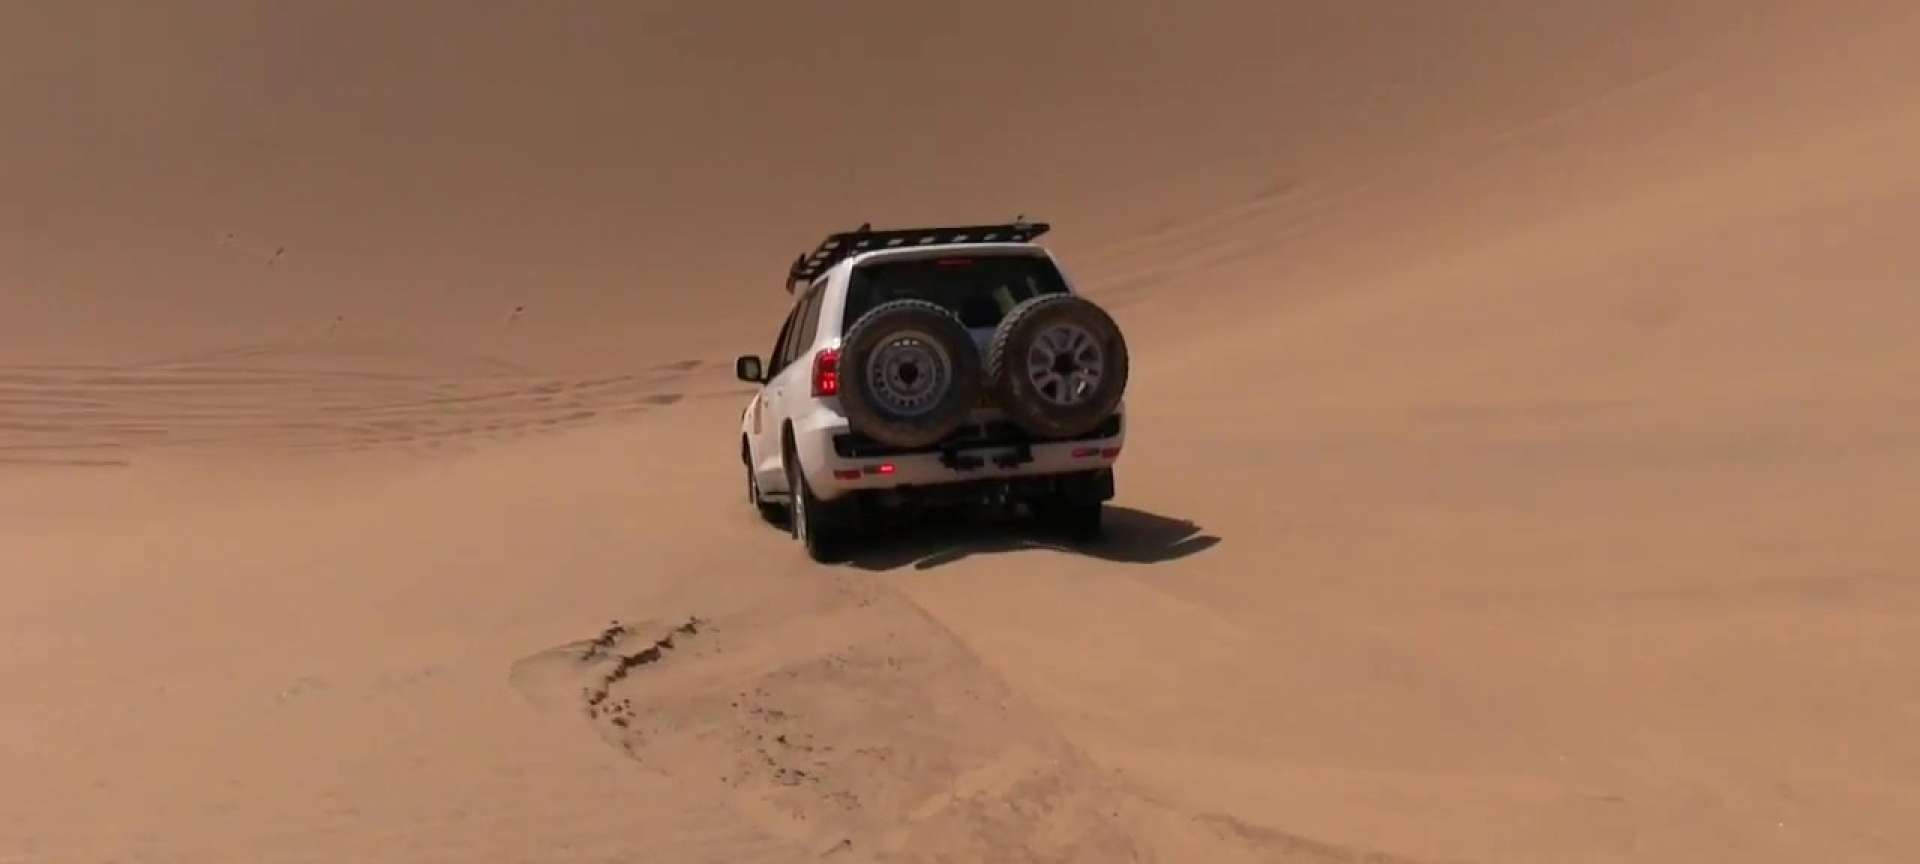 Dune driving costs are relatively inexpensive